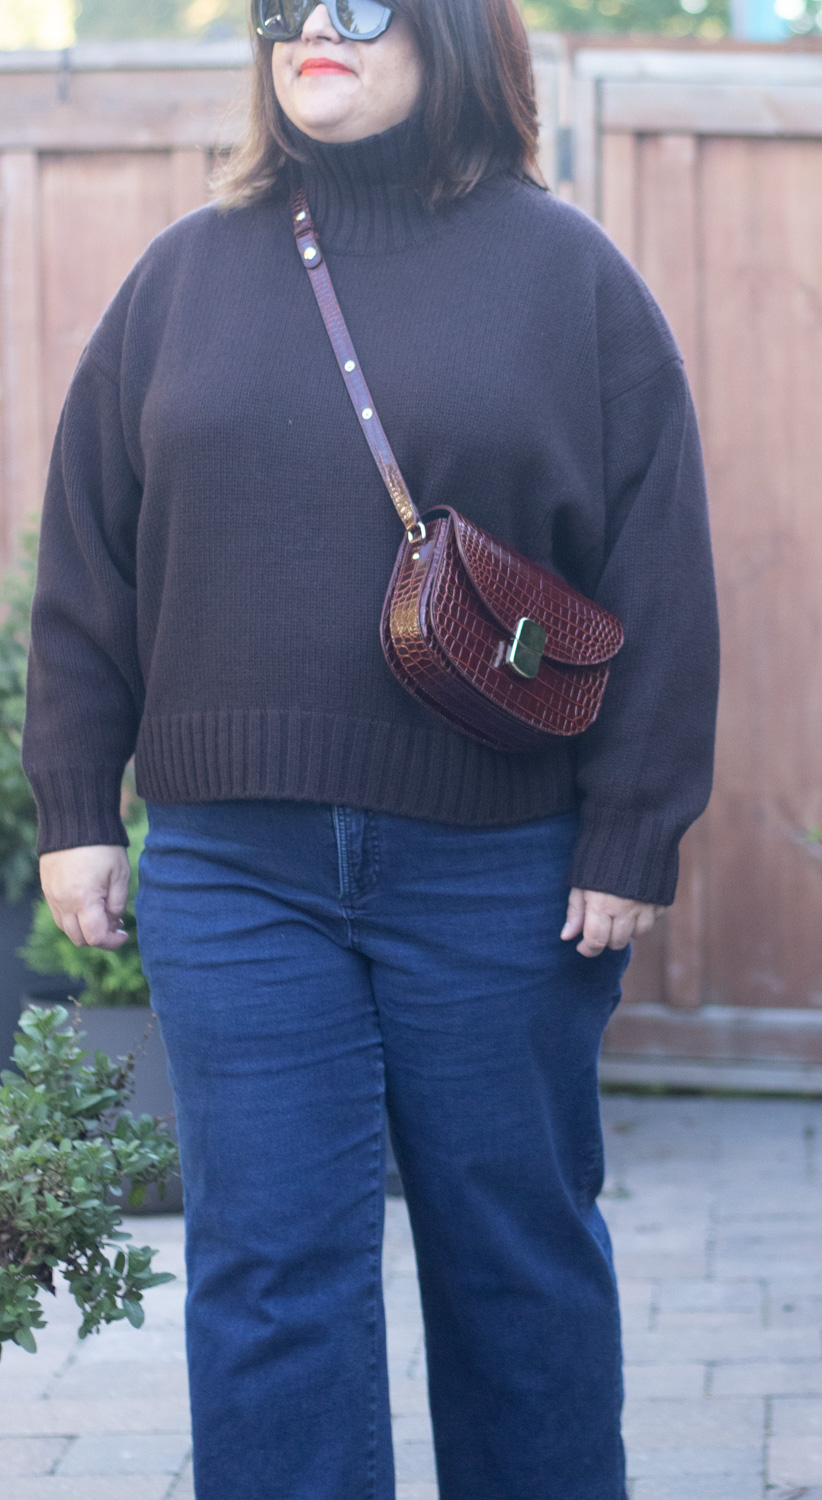 cos cashmere brown turtleneck sweater outfit